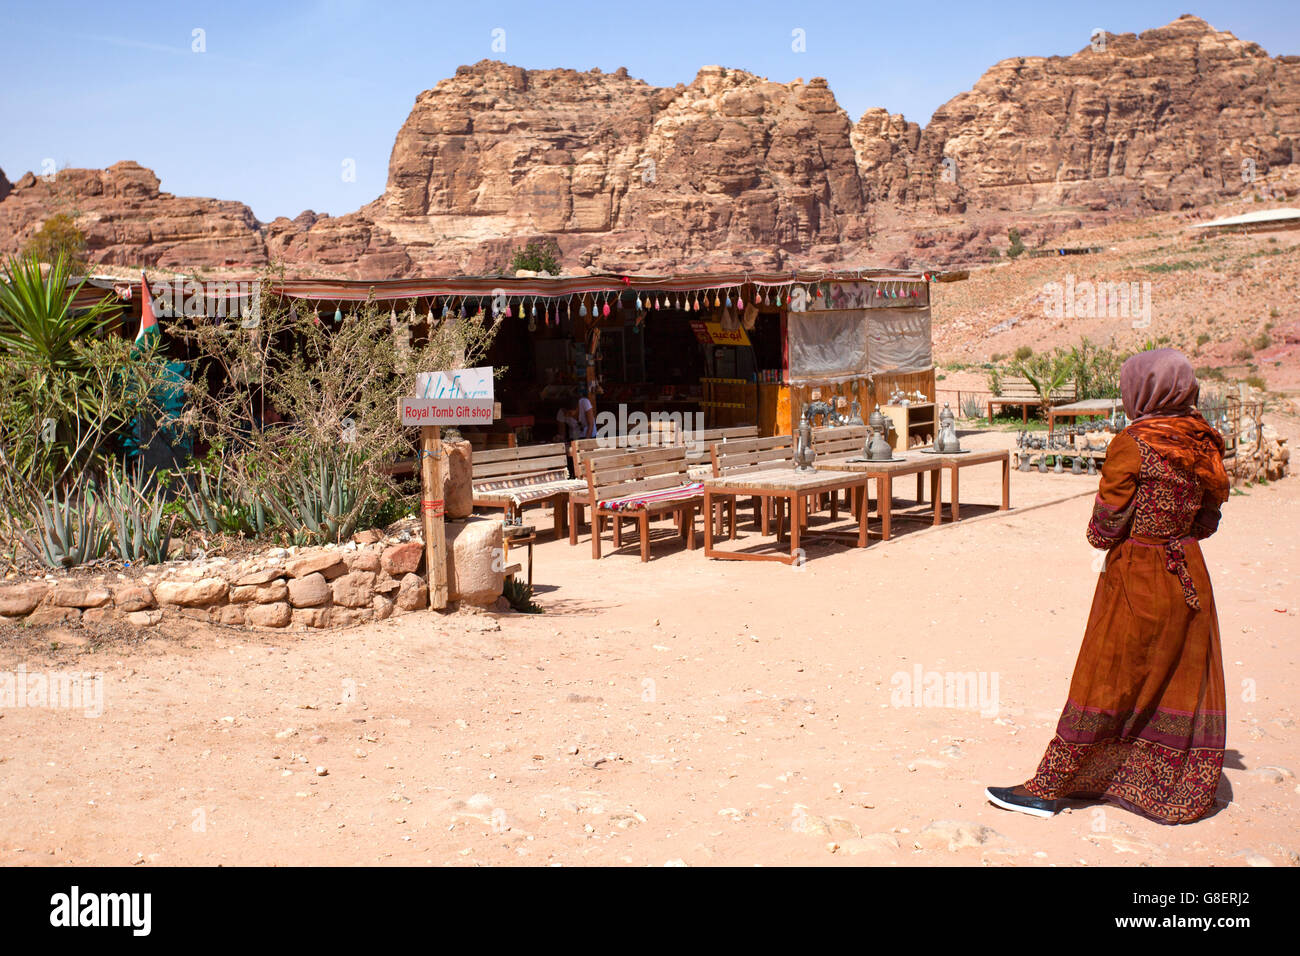 A restaurant and souvenir shop inside the Petra archaeological site, also known as the 'Rose City', Jordan, Middle East. Stock Photo